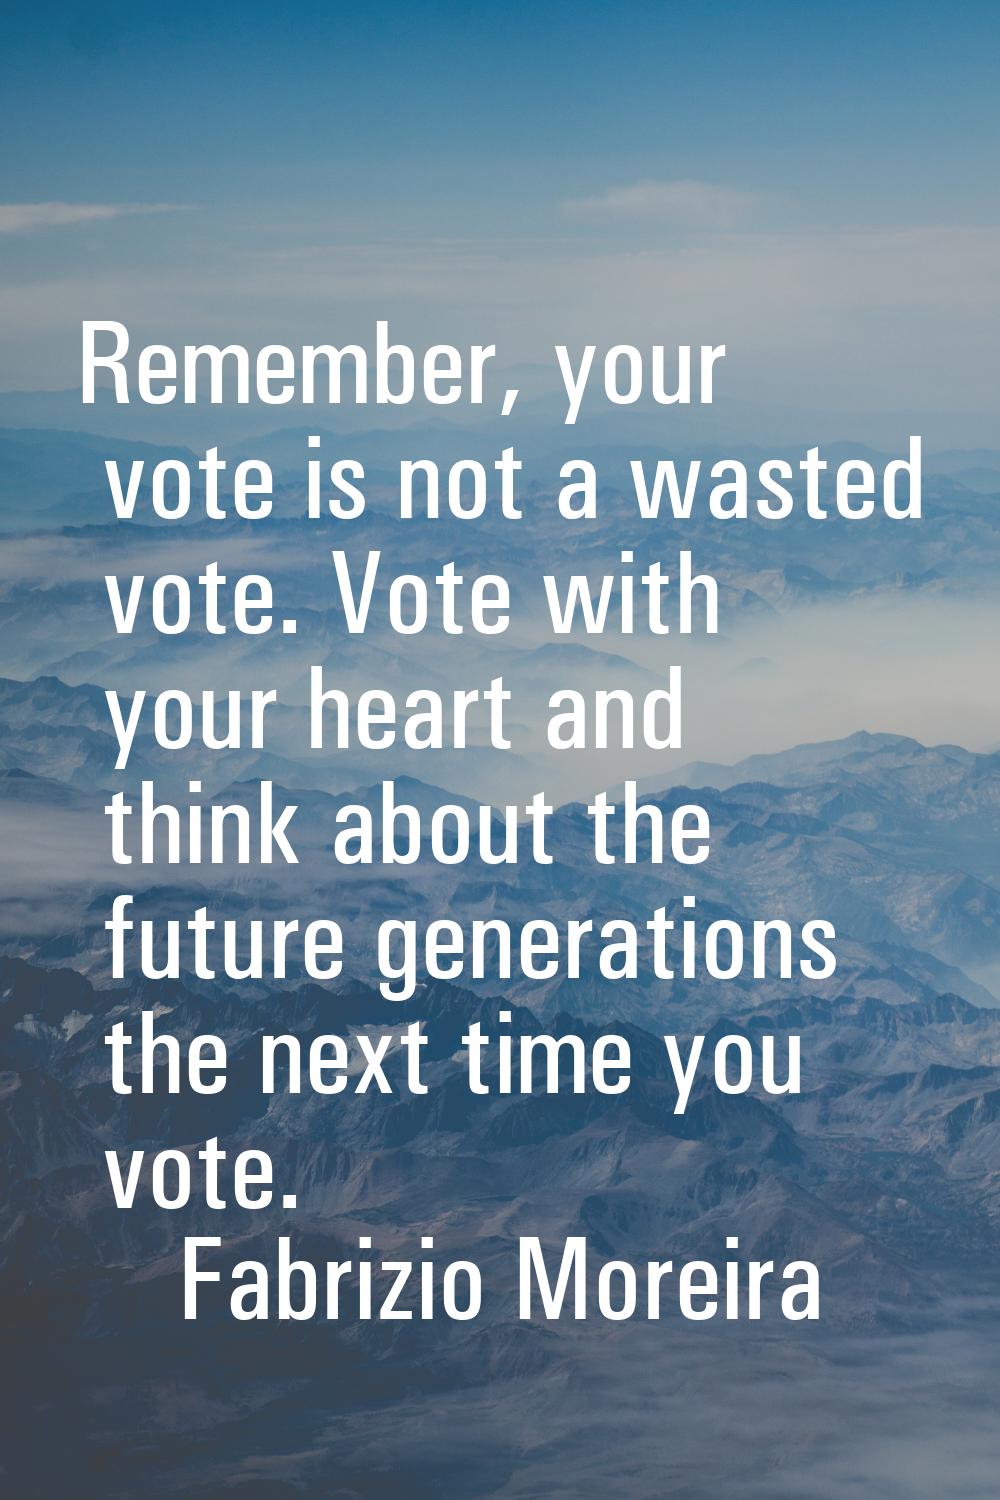 Remember, your vote is not a wasted vote. Vote with your heart and think about the future generatio